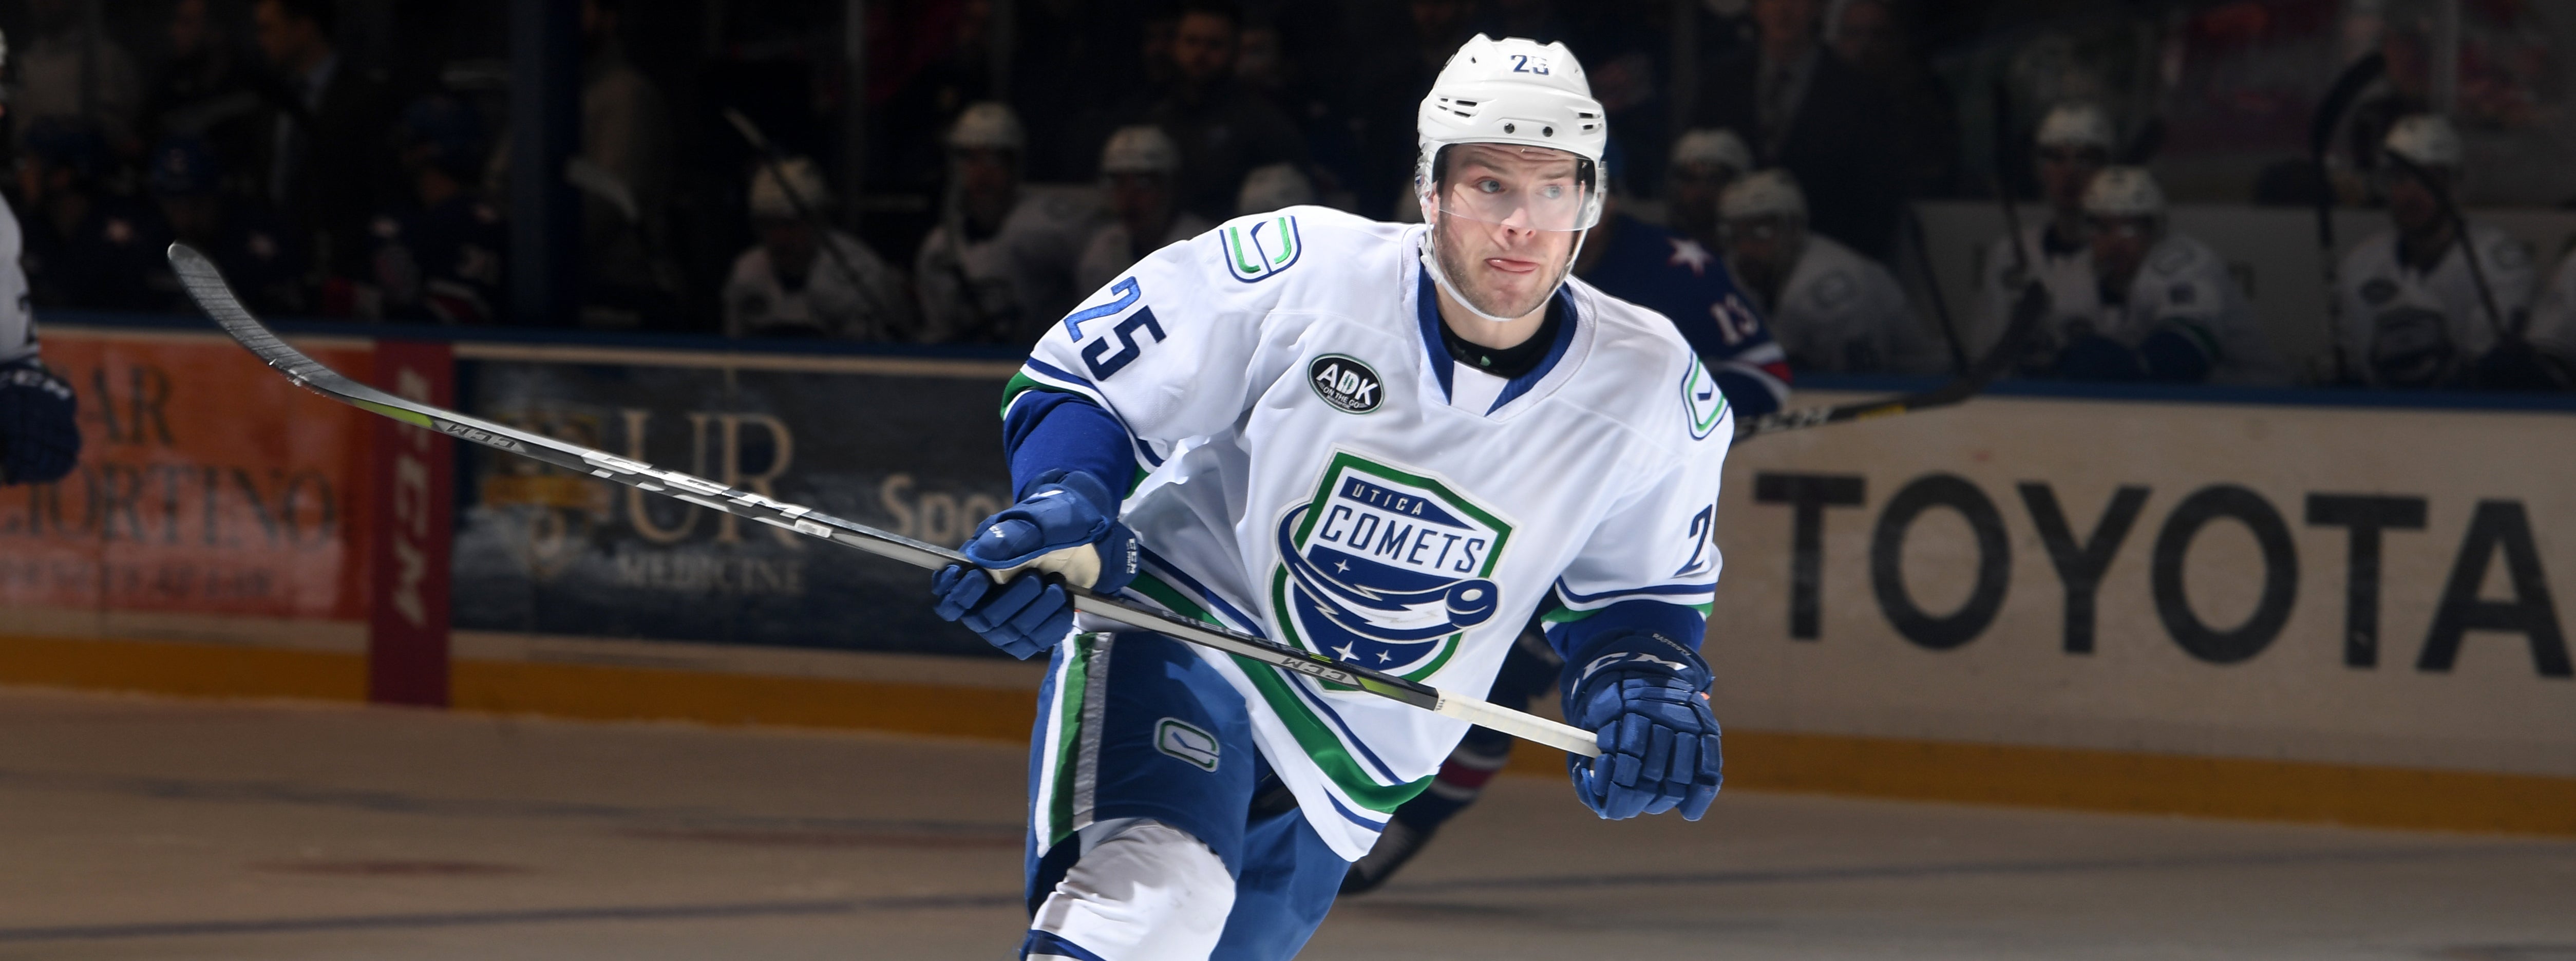 COMETS TOPPLE AMERKS IN SHOOTOUT